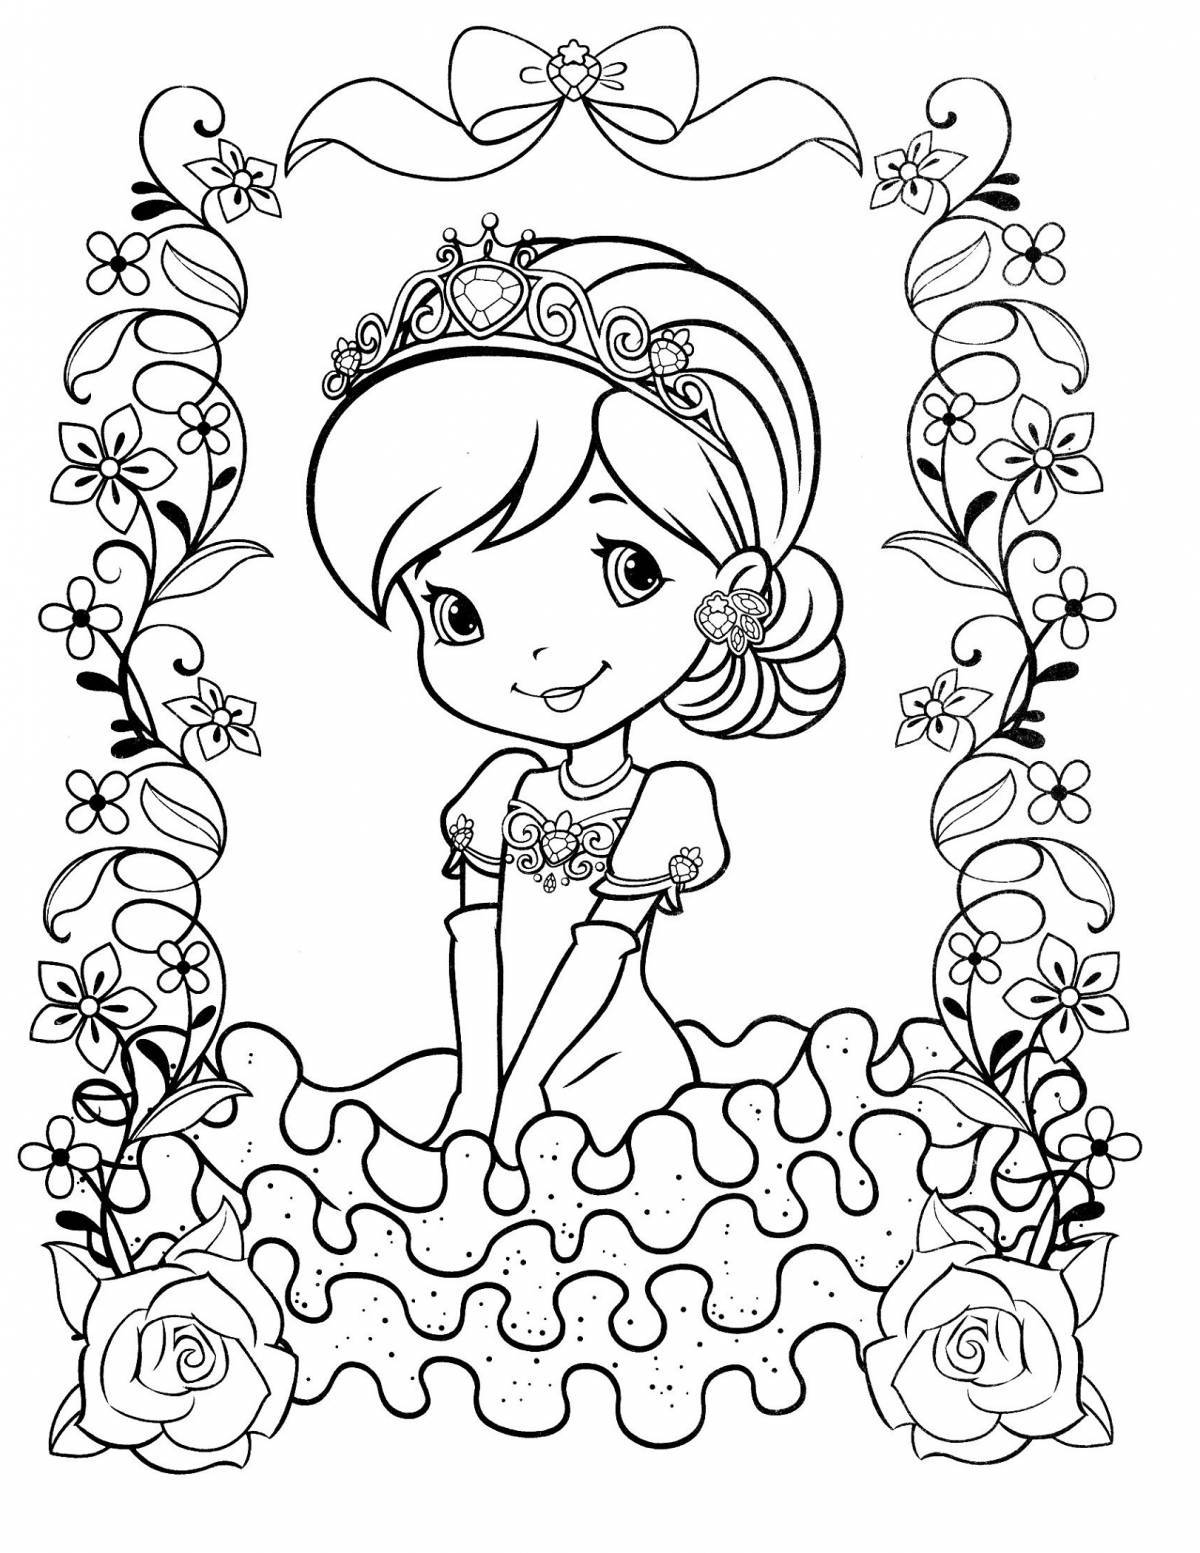 Generous coloring princess for children 5-6 years old